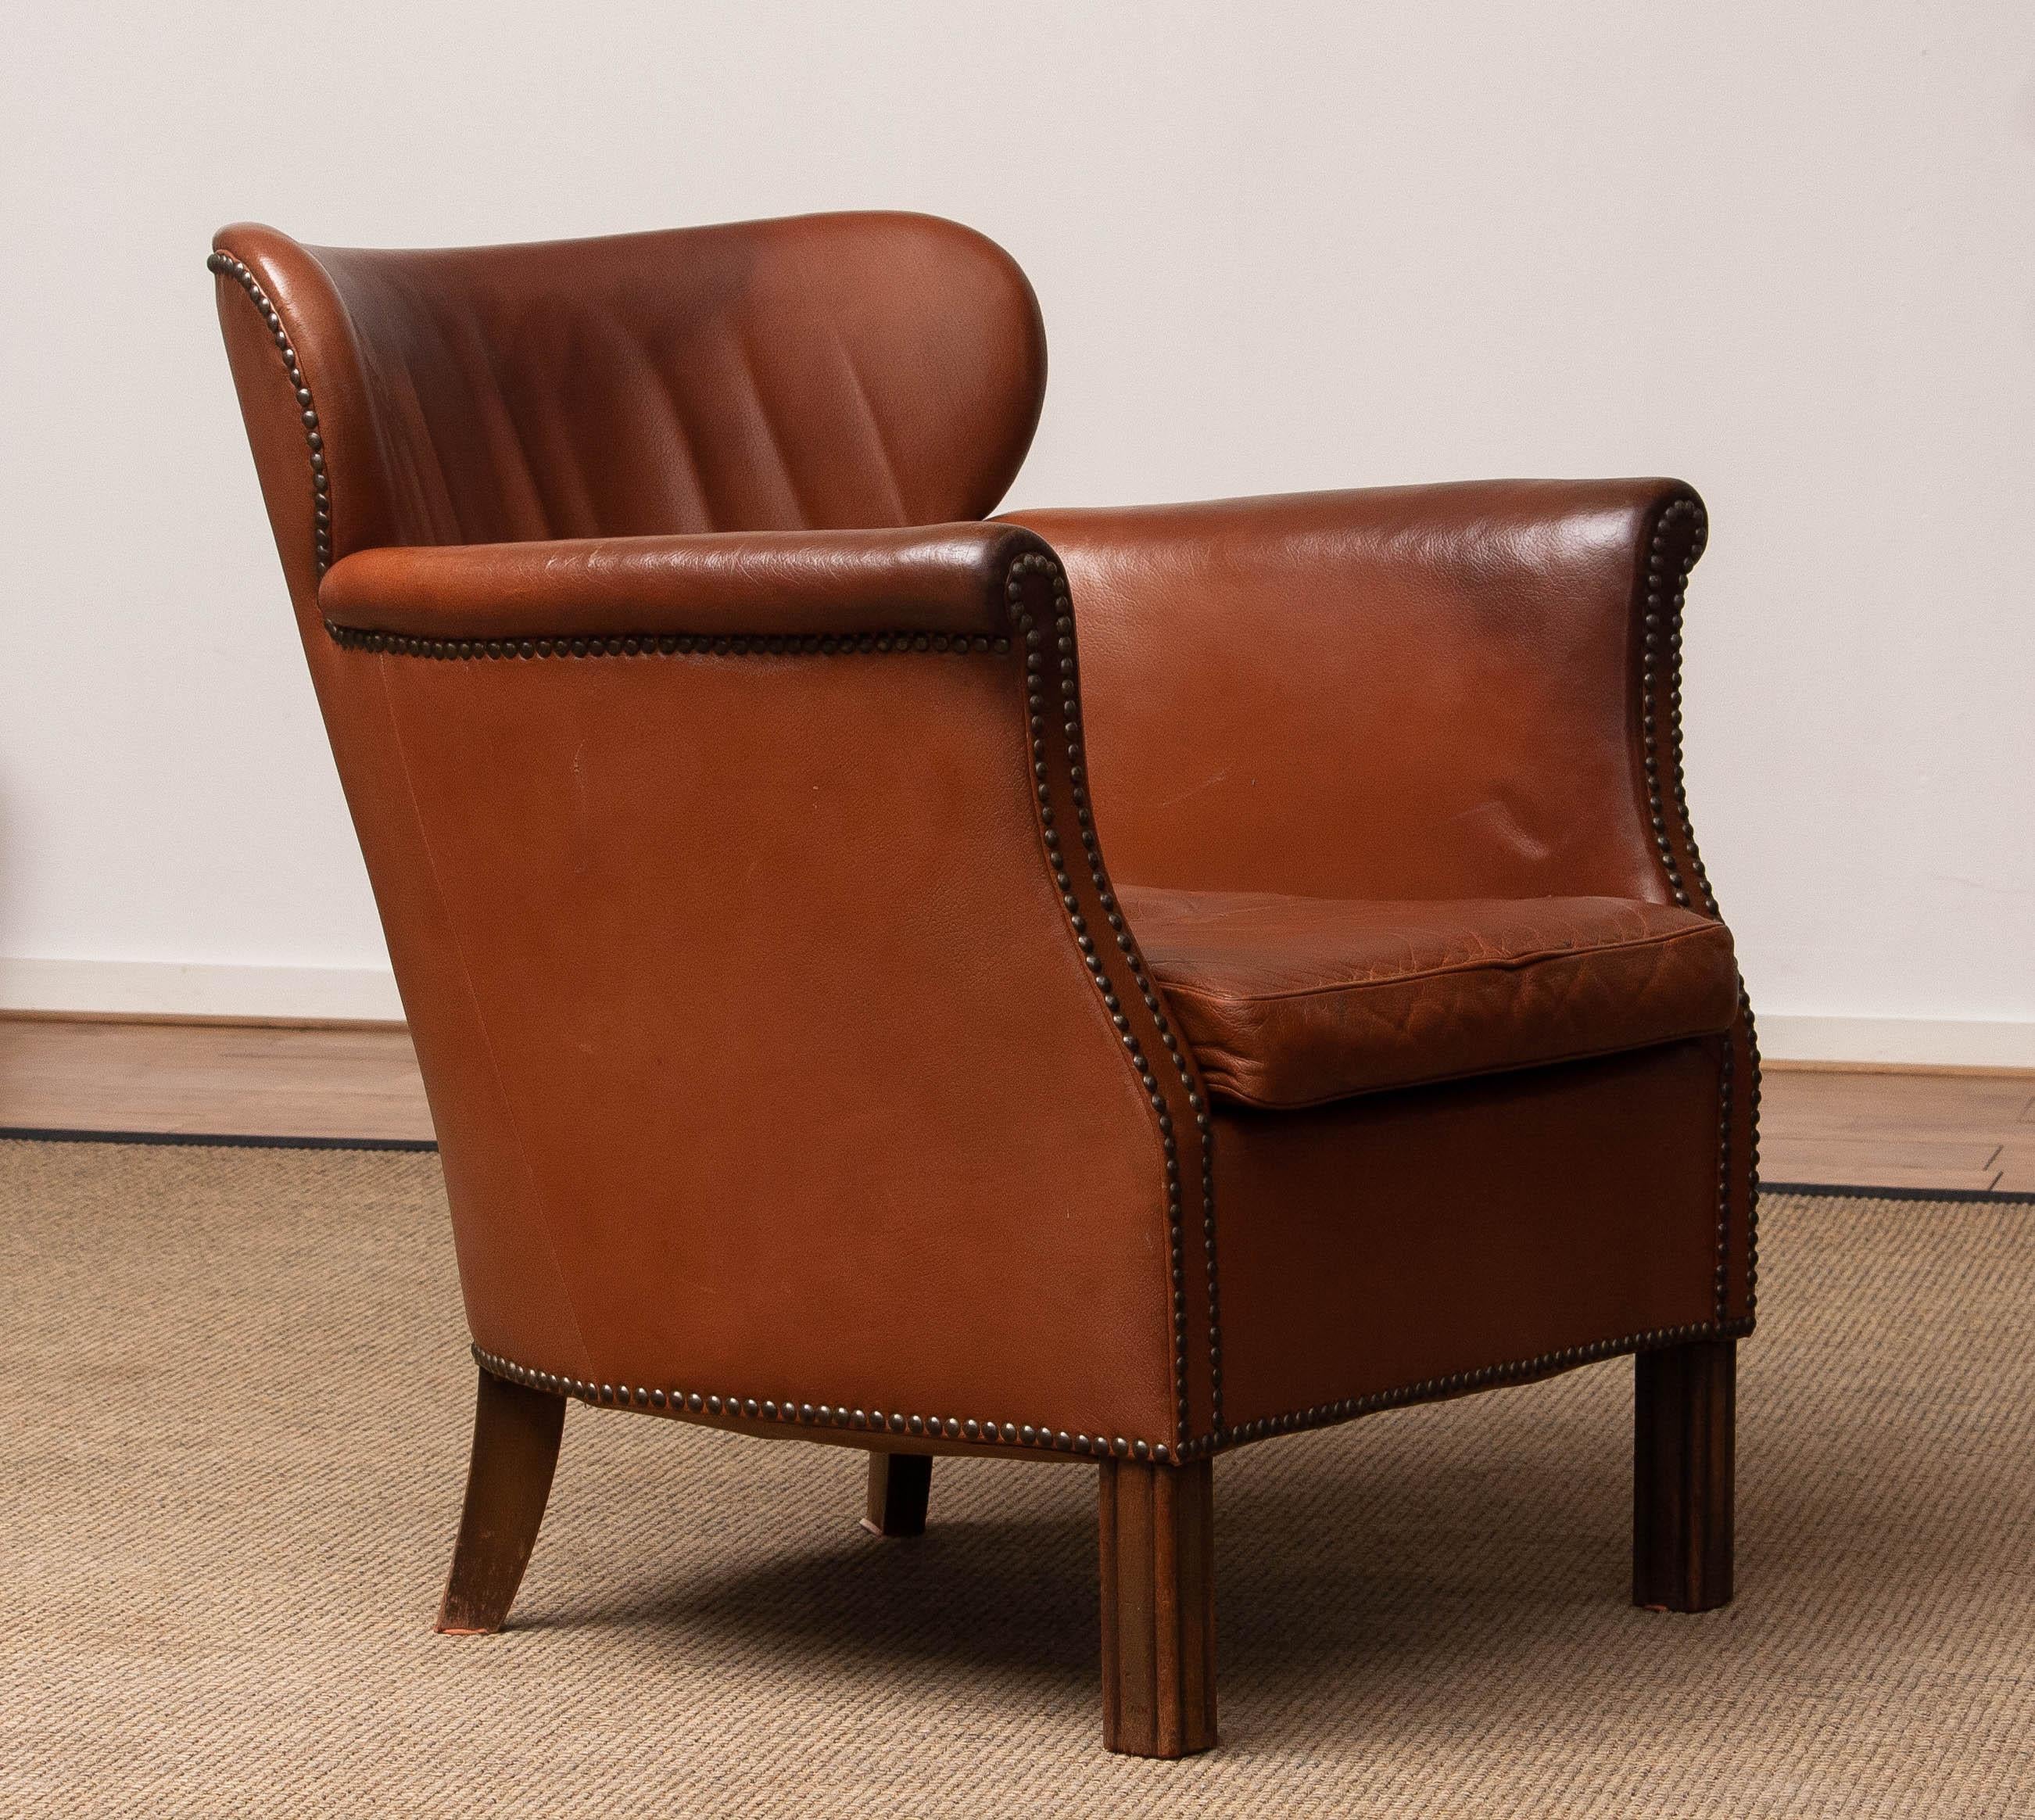 Chesterfield 1940's Scandinavian Tan / Brown Nailed Leather Club / Cigar Chair from Denmark